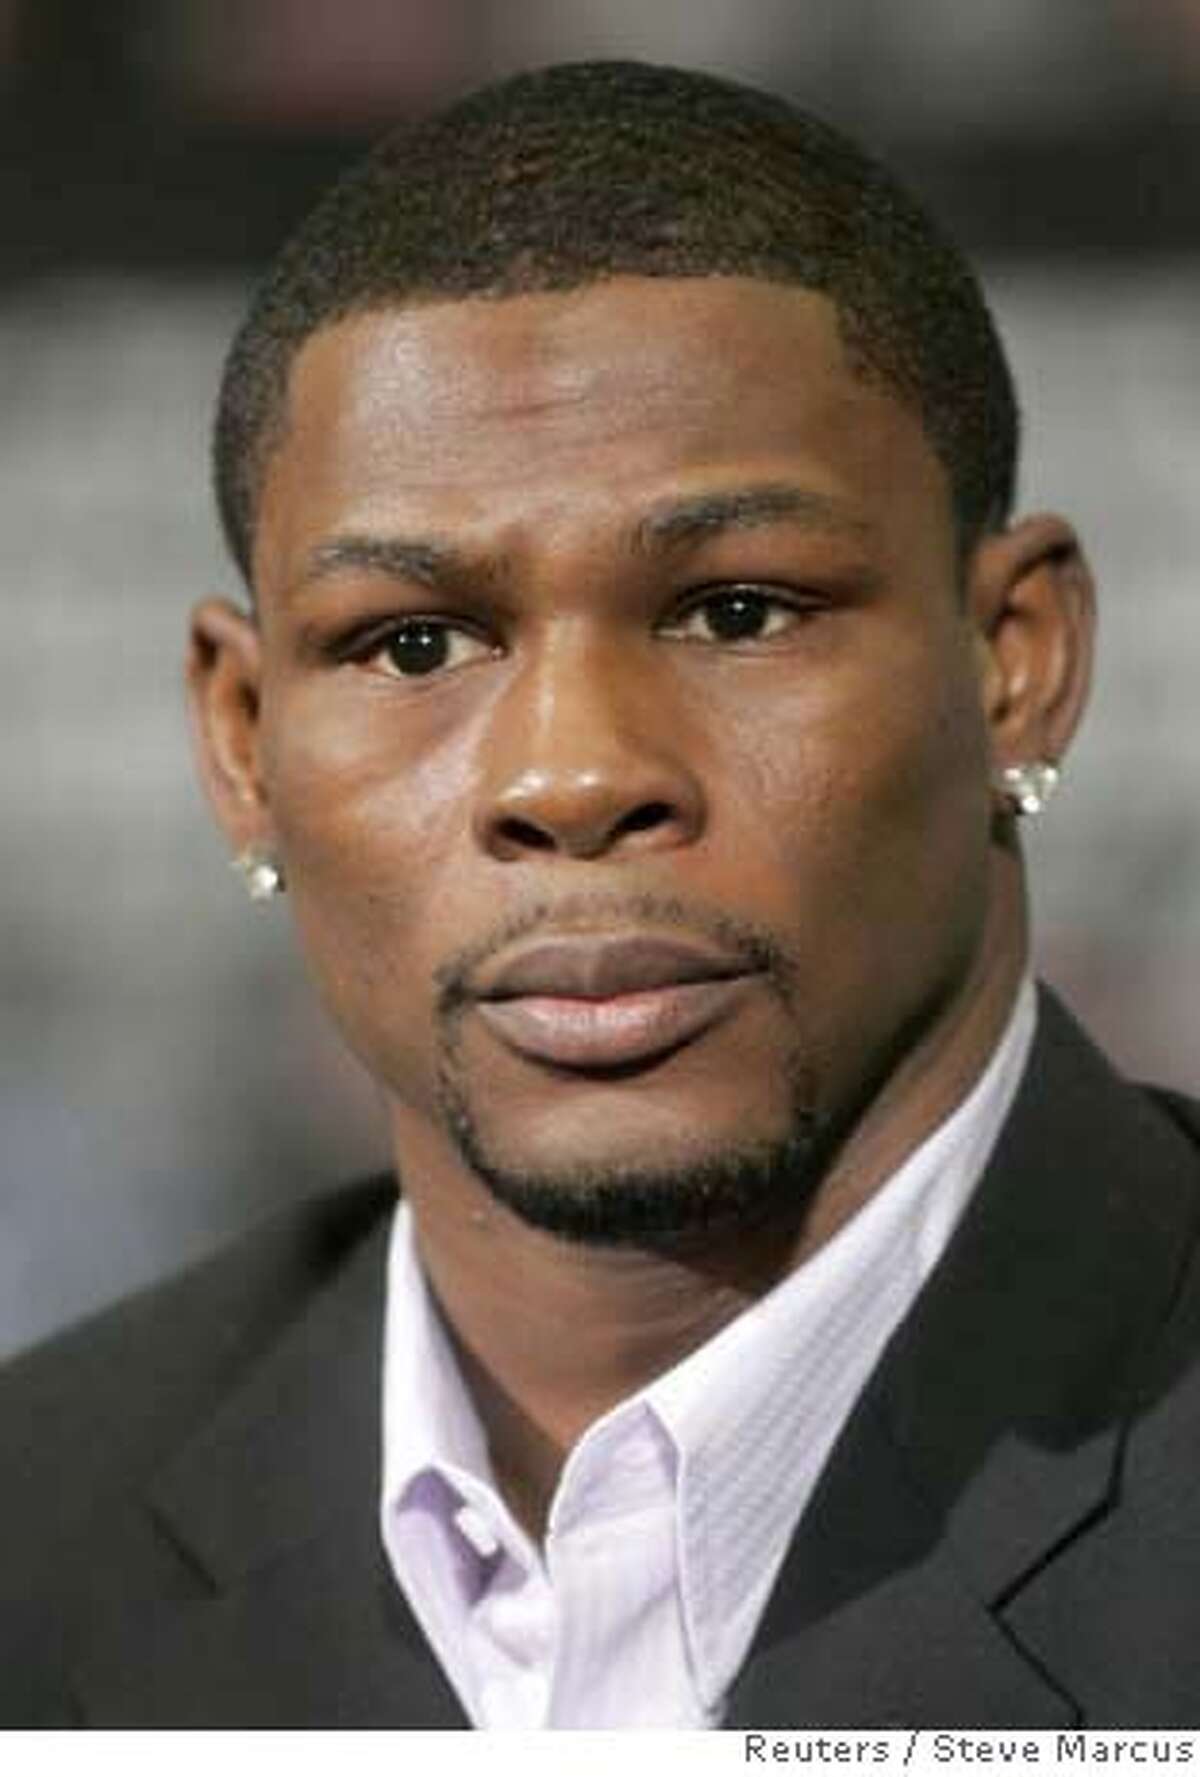 Jermain Taylor, of Arkansas, attends a news conference at the MGM Grand hotel in Las Vegas, Nevada February 13, 2008. Taylor will face WBC middleweight champion Kelly Pavlik, of Ohio, in a 12-round non-title rematch in the MGM Grand Garden Arena on February 16. REUTERS/Las Vegas Sun/Steve Marcus (UNITED STATES)